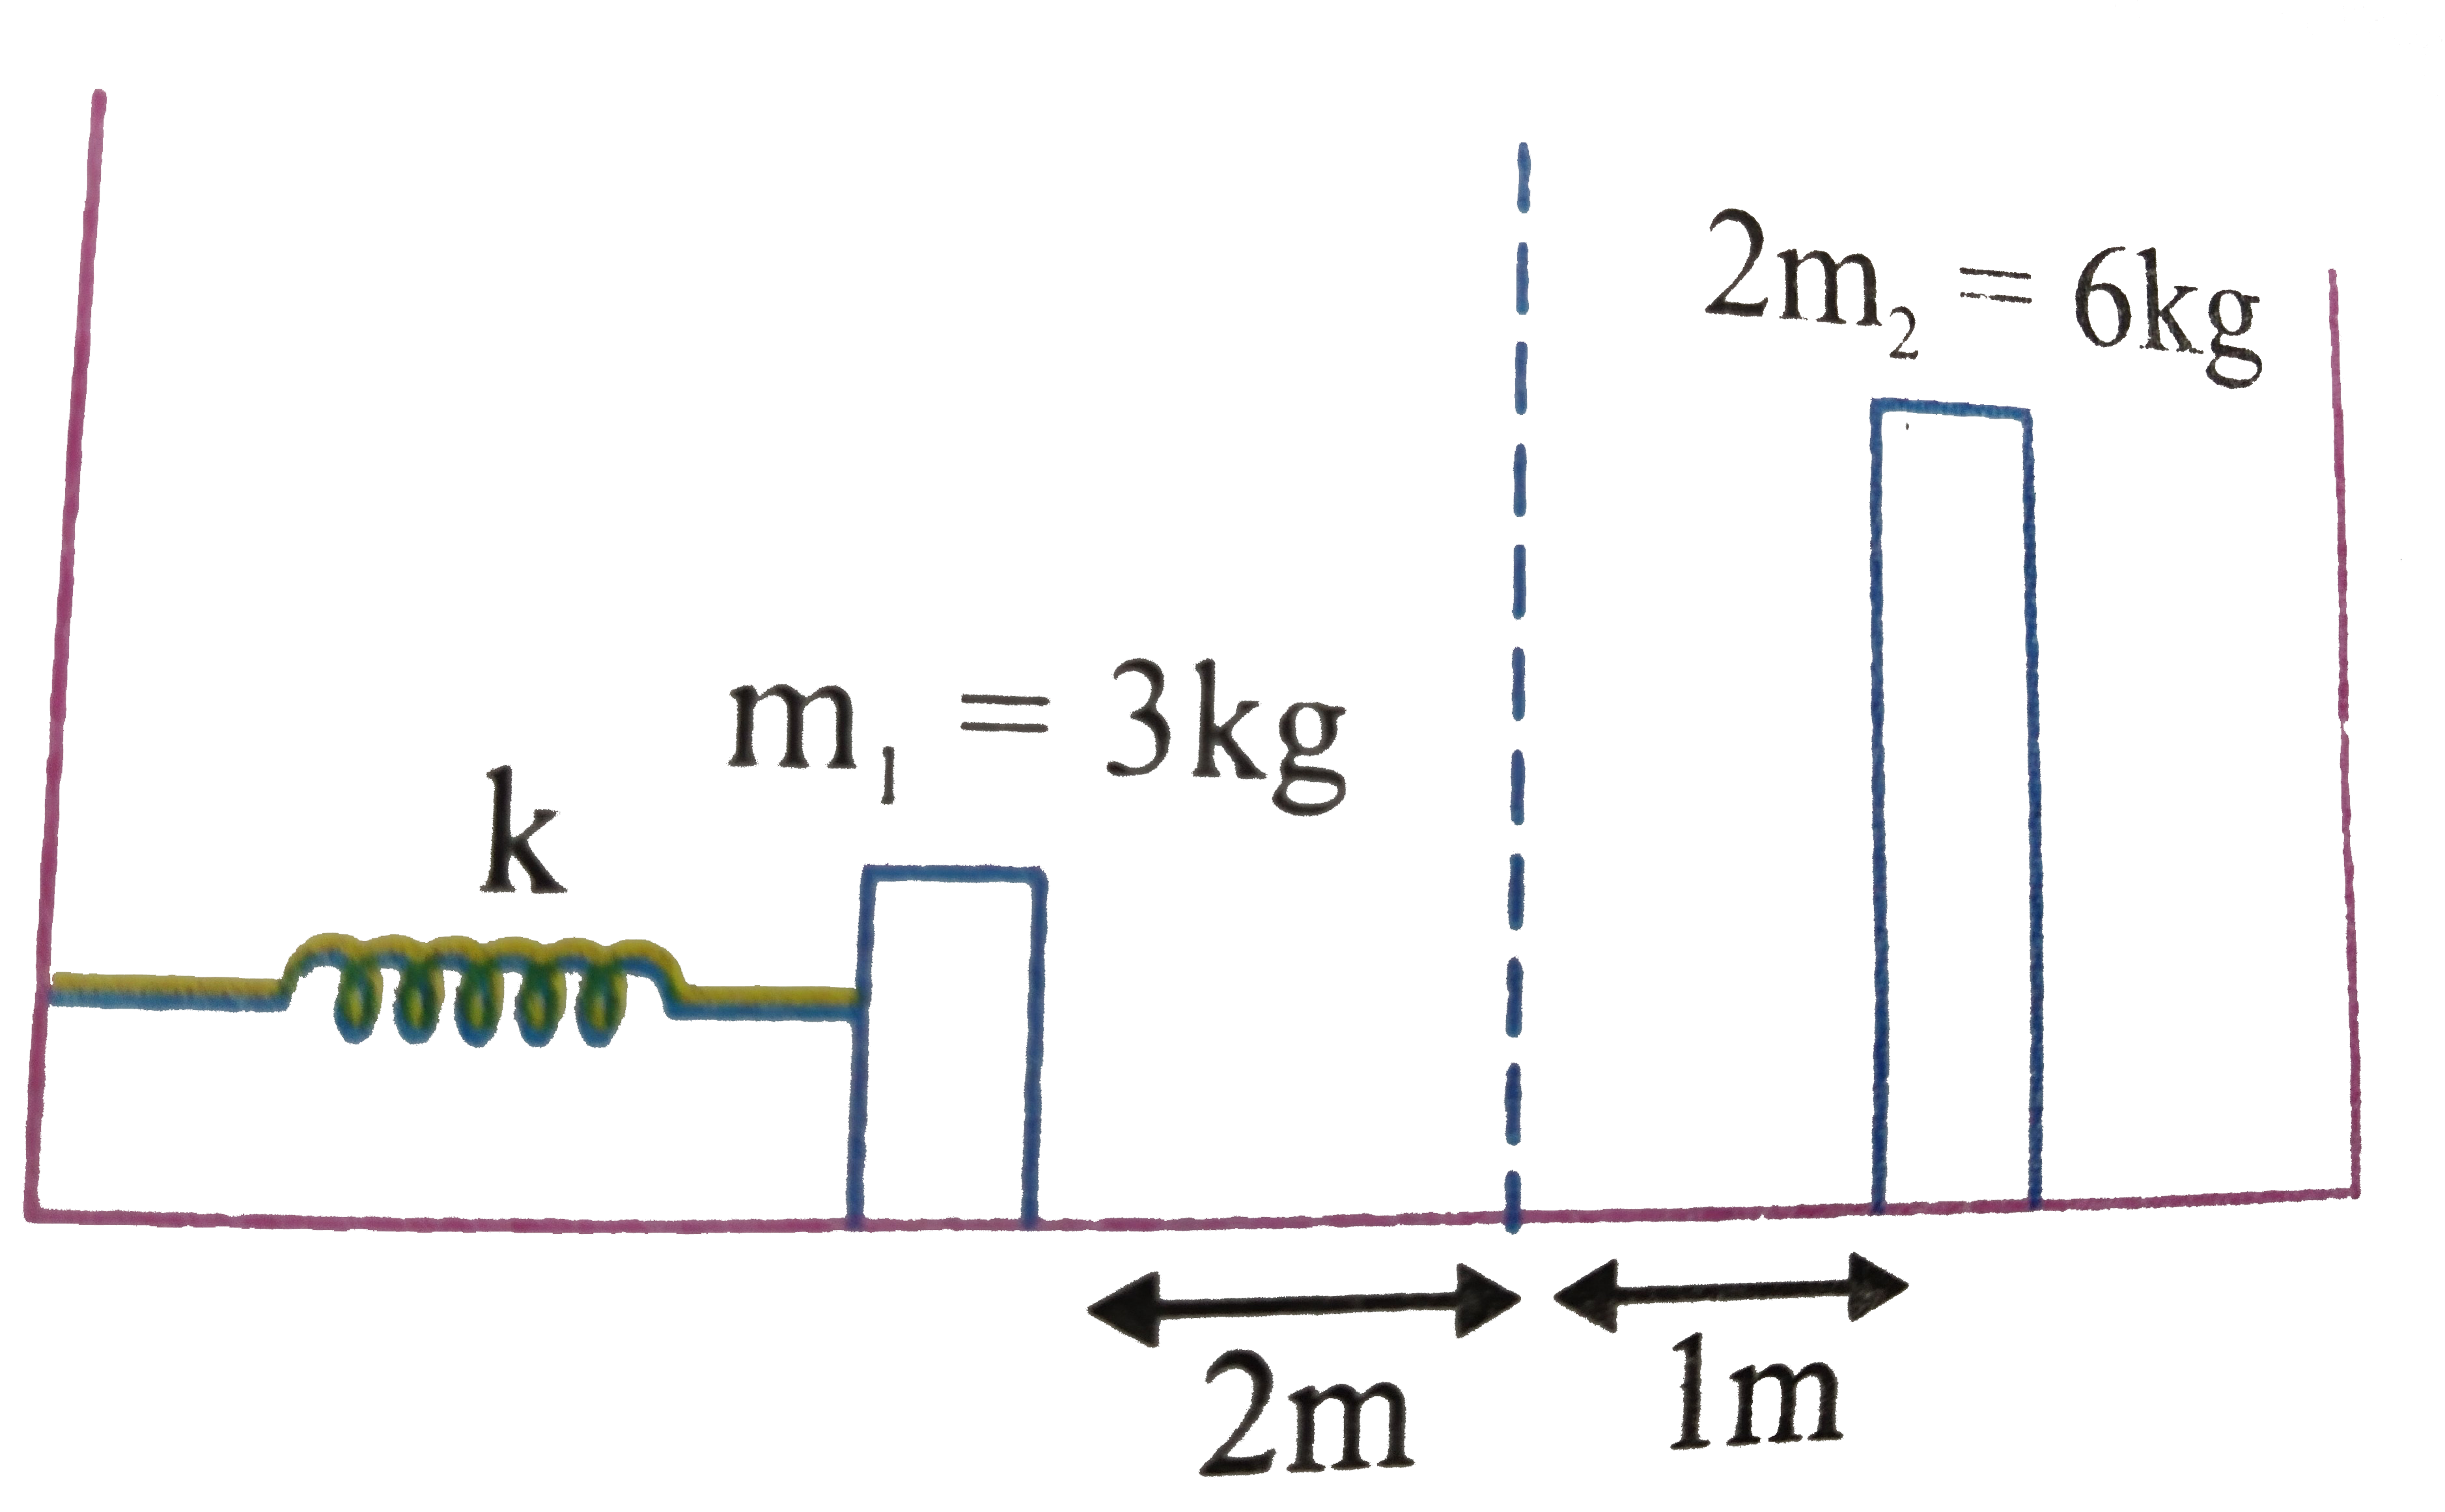 Two blocks of masses 3kg block is attached to a spring with a force constant, k k = 900N//ma which is compressed 2m initially from its equilibrium position. When 3kg mass is released, it strikes the 6kg mass and the two stick togther in an inelastic collision.       The common velocity of the blocks after collision is